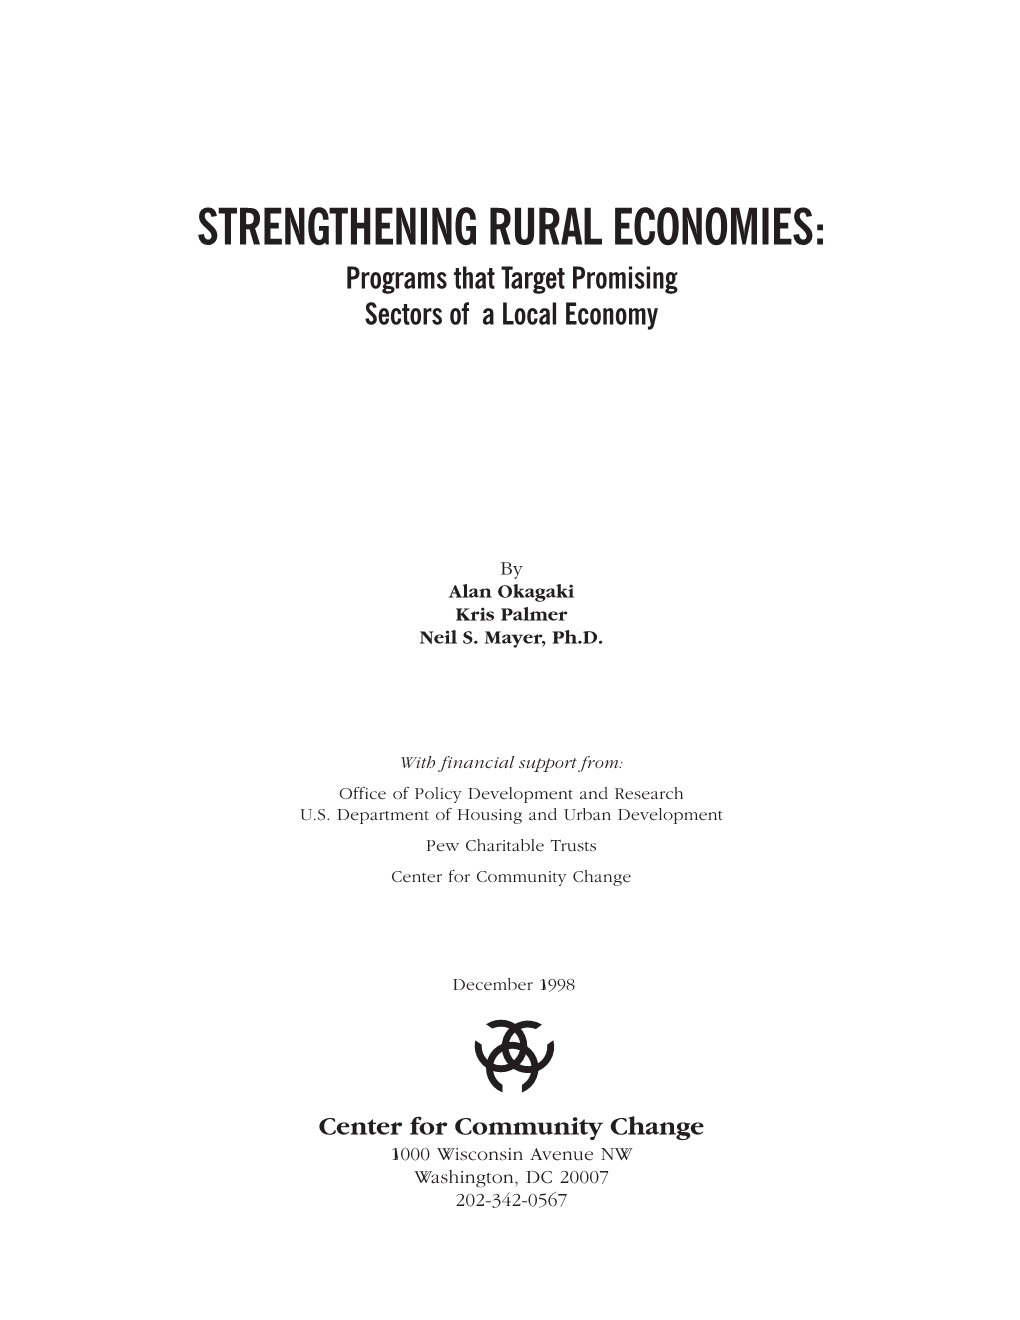 STRENGTHENING RURAL ECONOMIES: Programs That Target Promising Sectors of a Local Economy